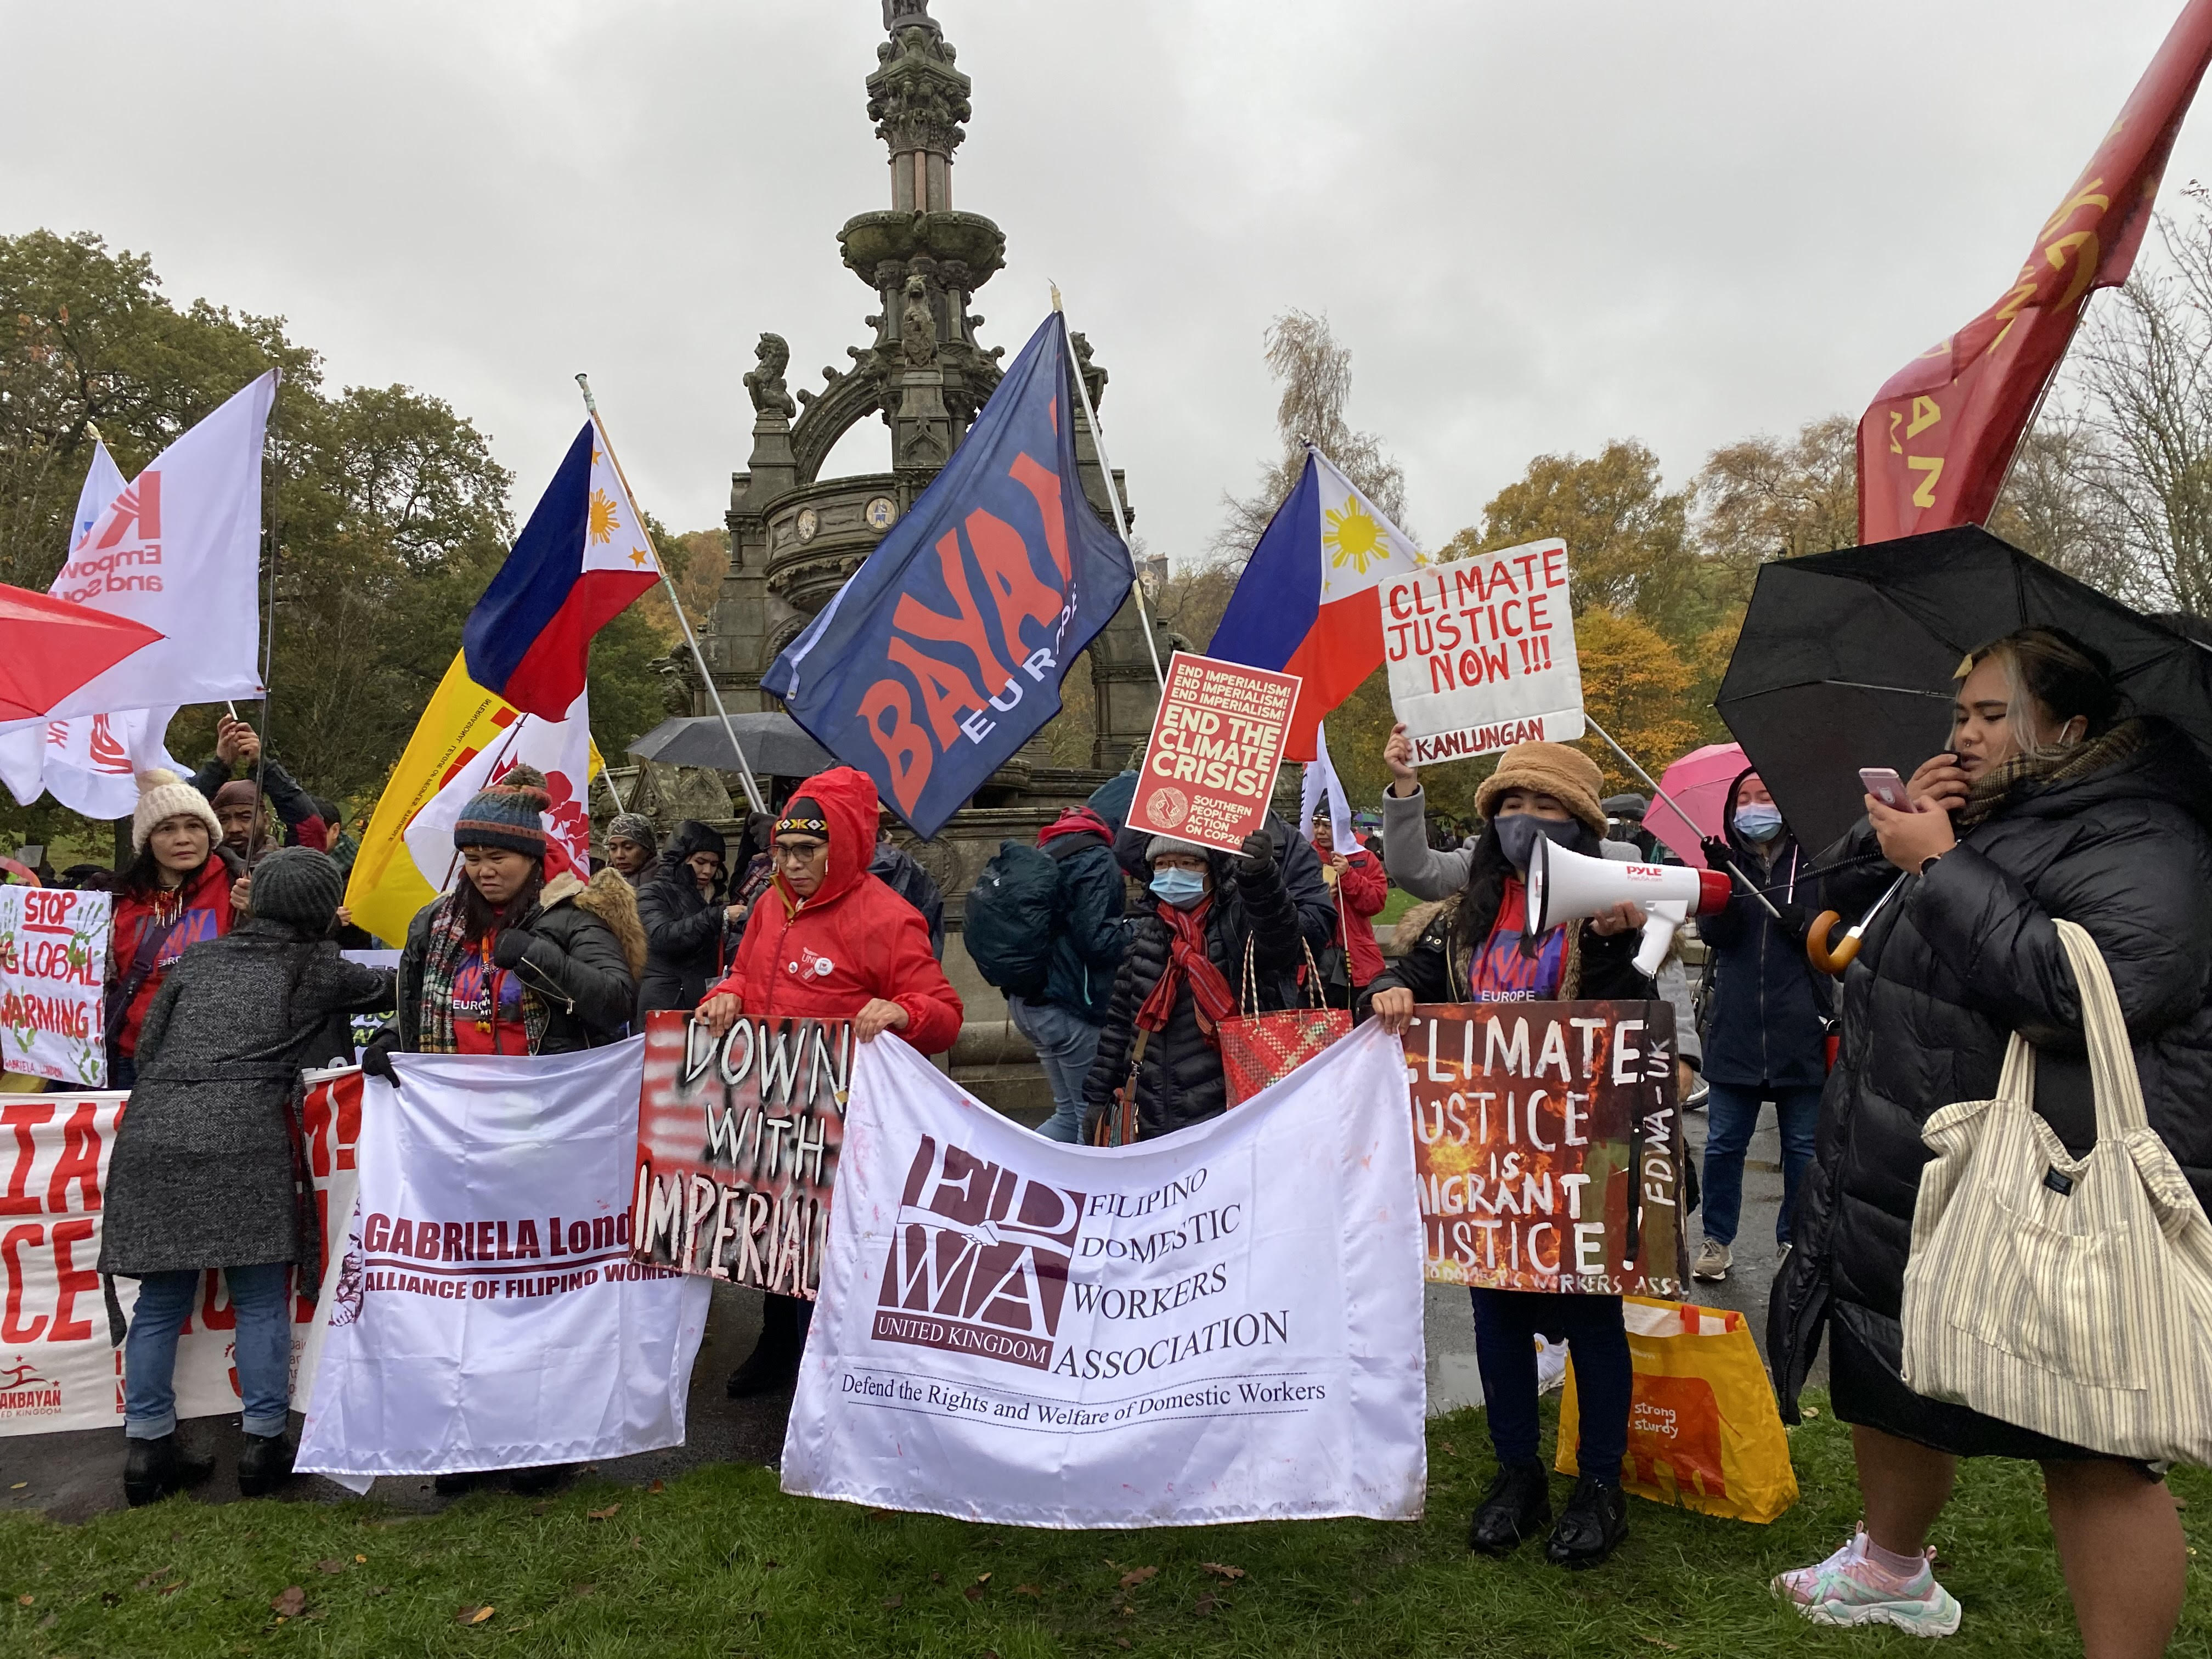 Activists from developing countries band together at a climate justice rally in Glasgow. Photo by Pia Ranada/Rappler